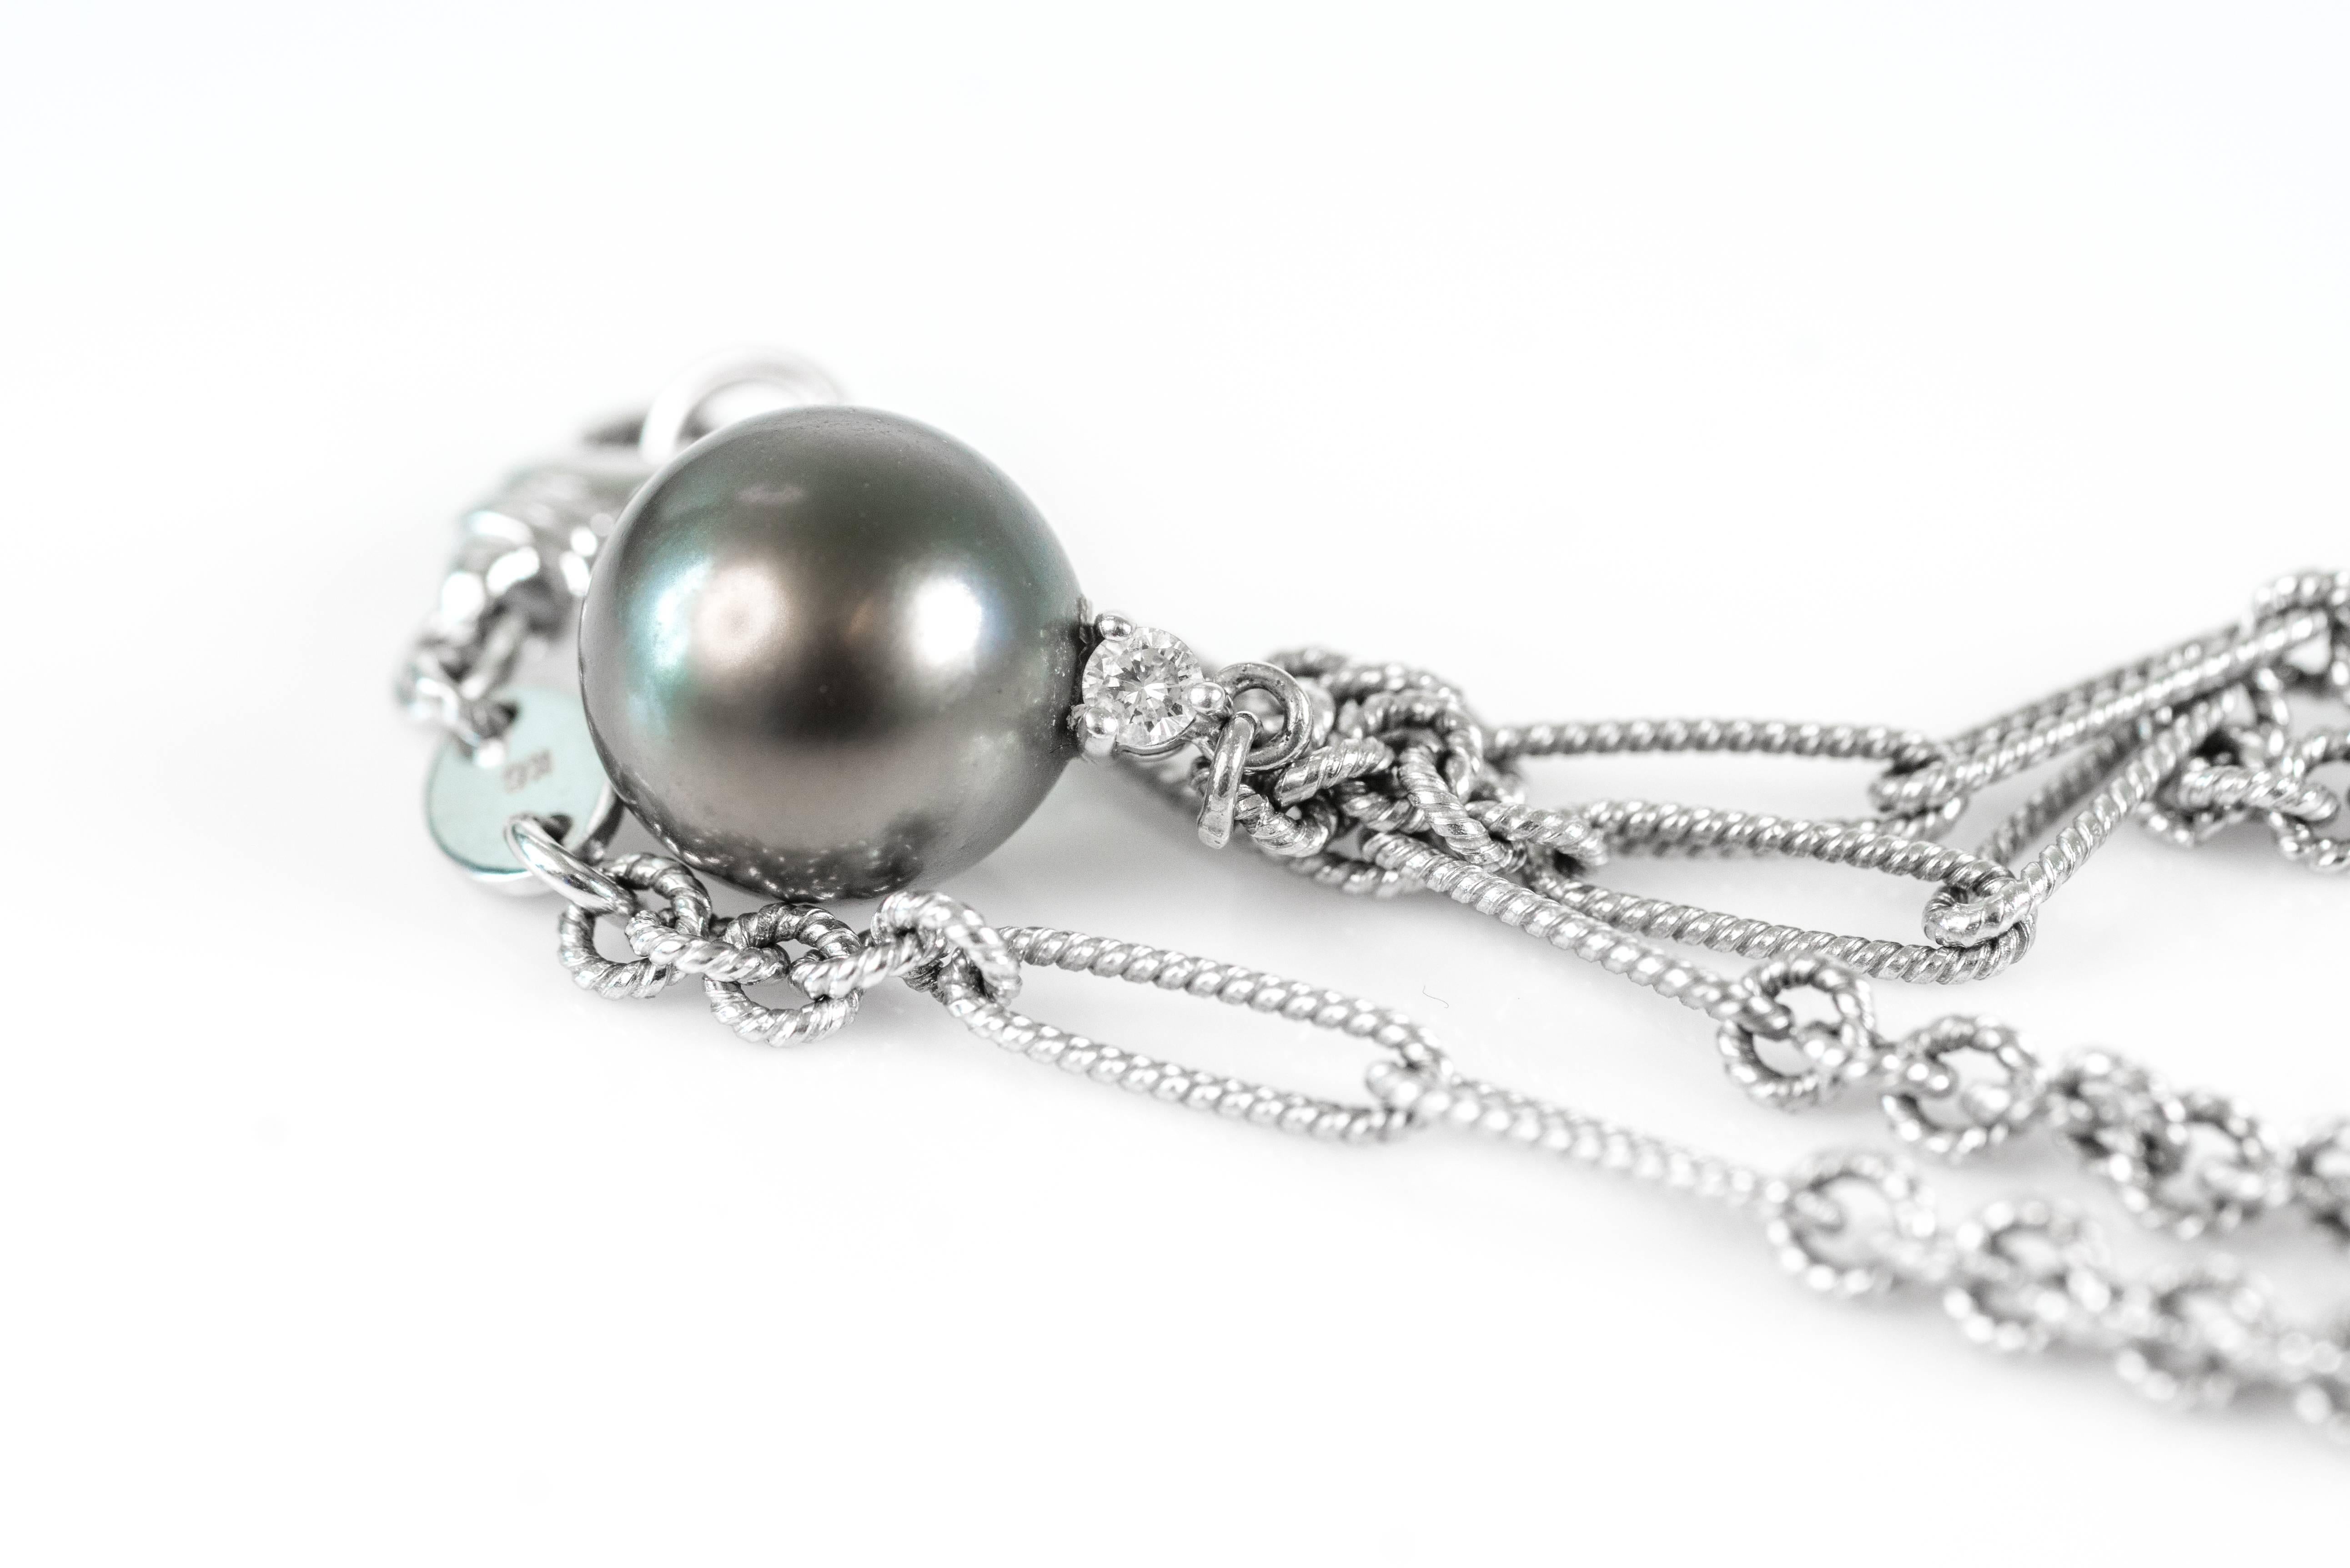 This 1990s Italian classic necklace features a grayish-green 11.5 millimeter Natural Tahitian South Sea Pearl accented by a .05 carat round brilliant diamond. The 18 karat white gold Figaro chain features links crafted in a braided weave pattern.